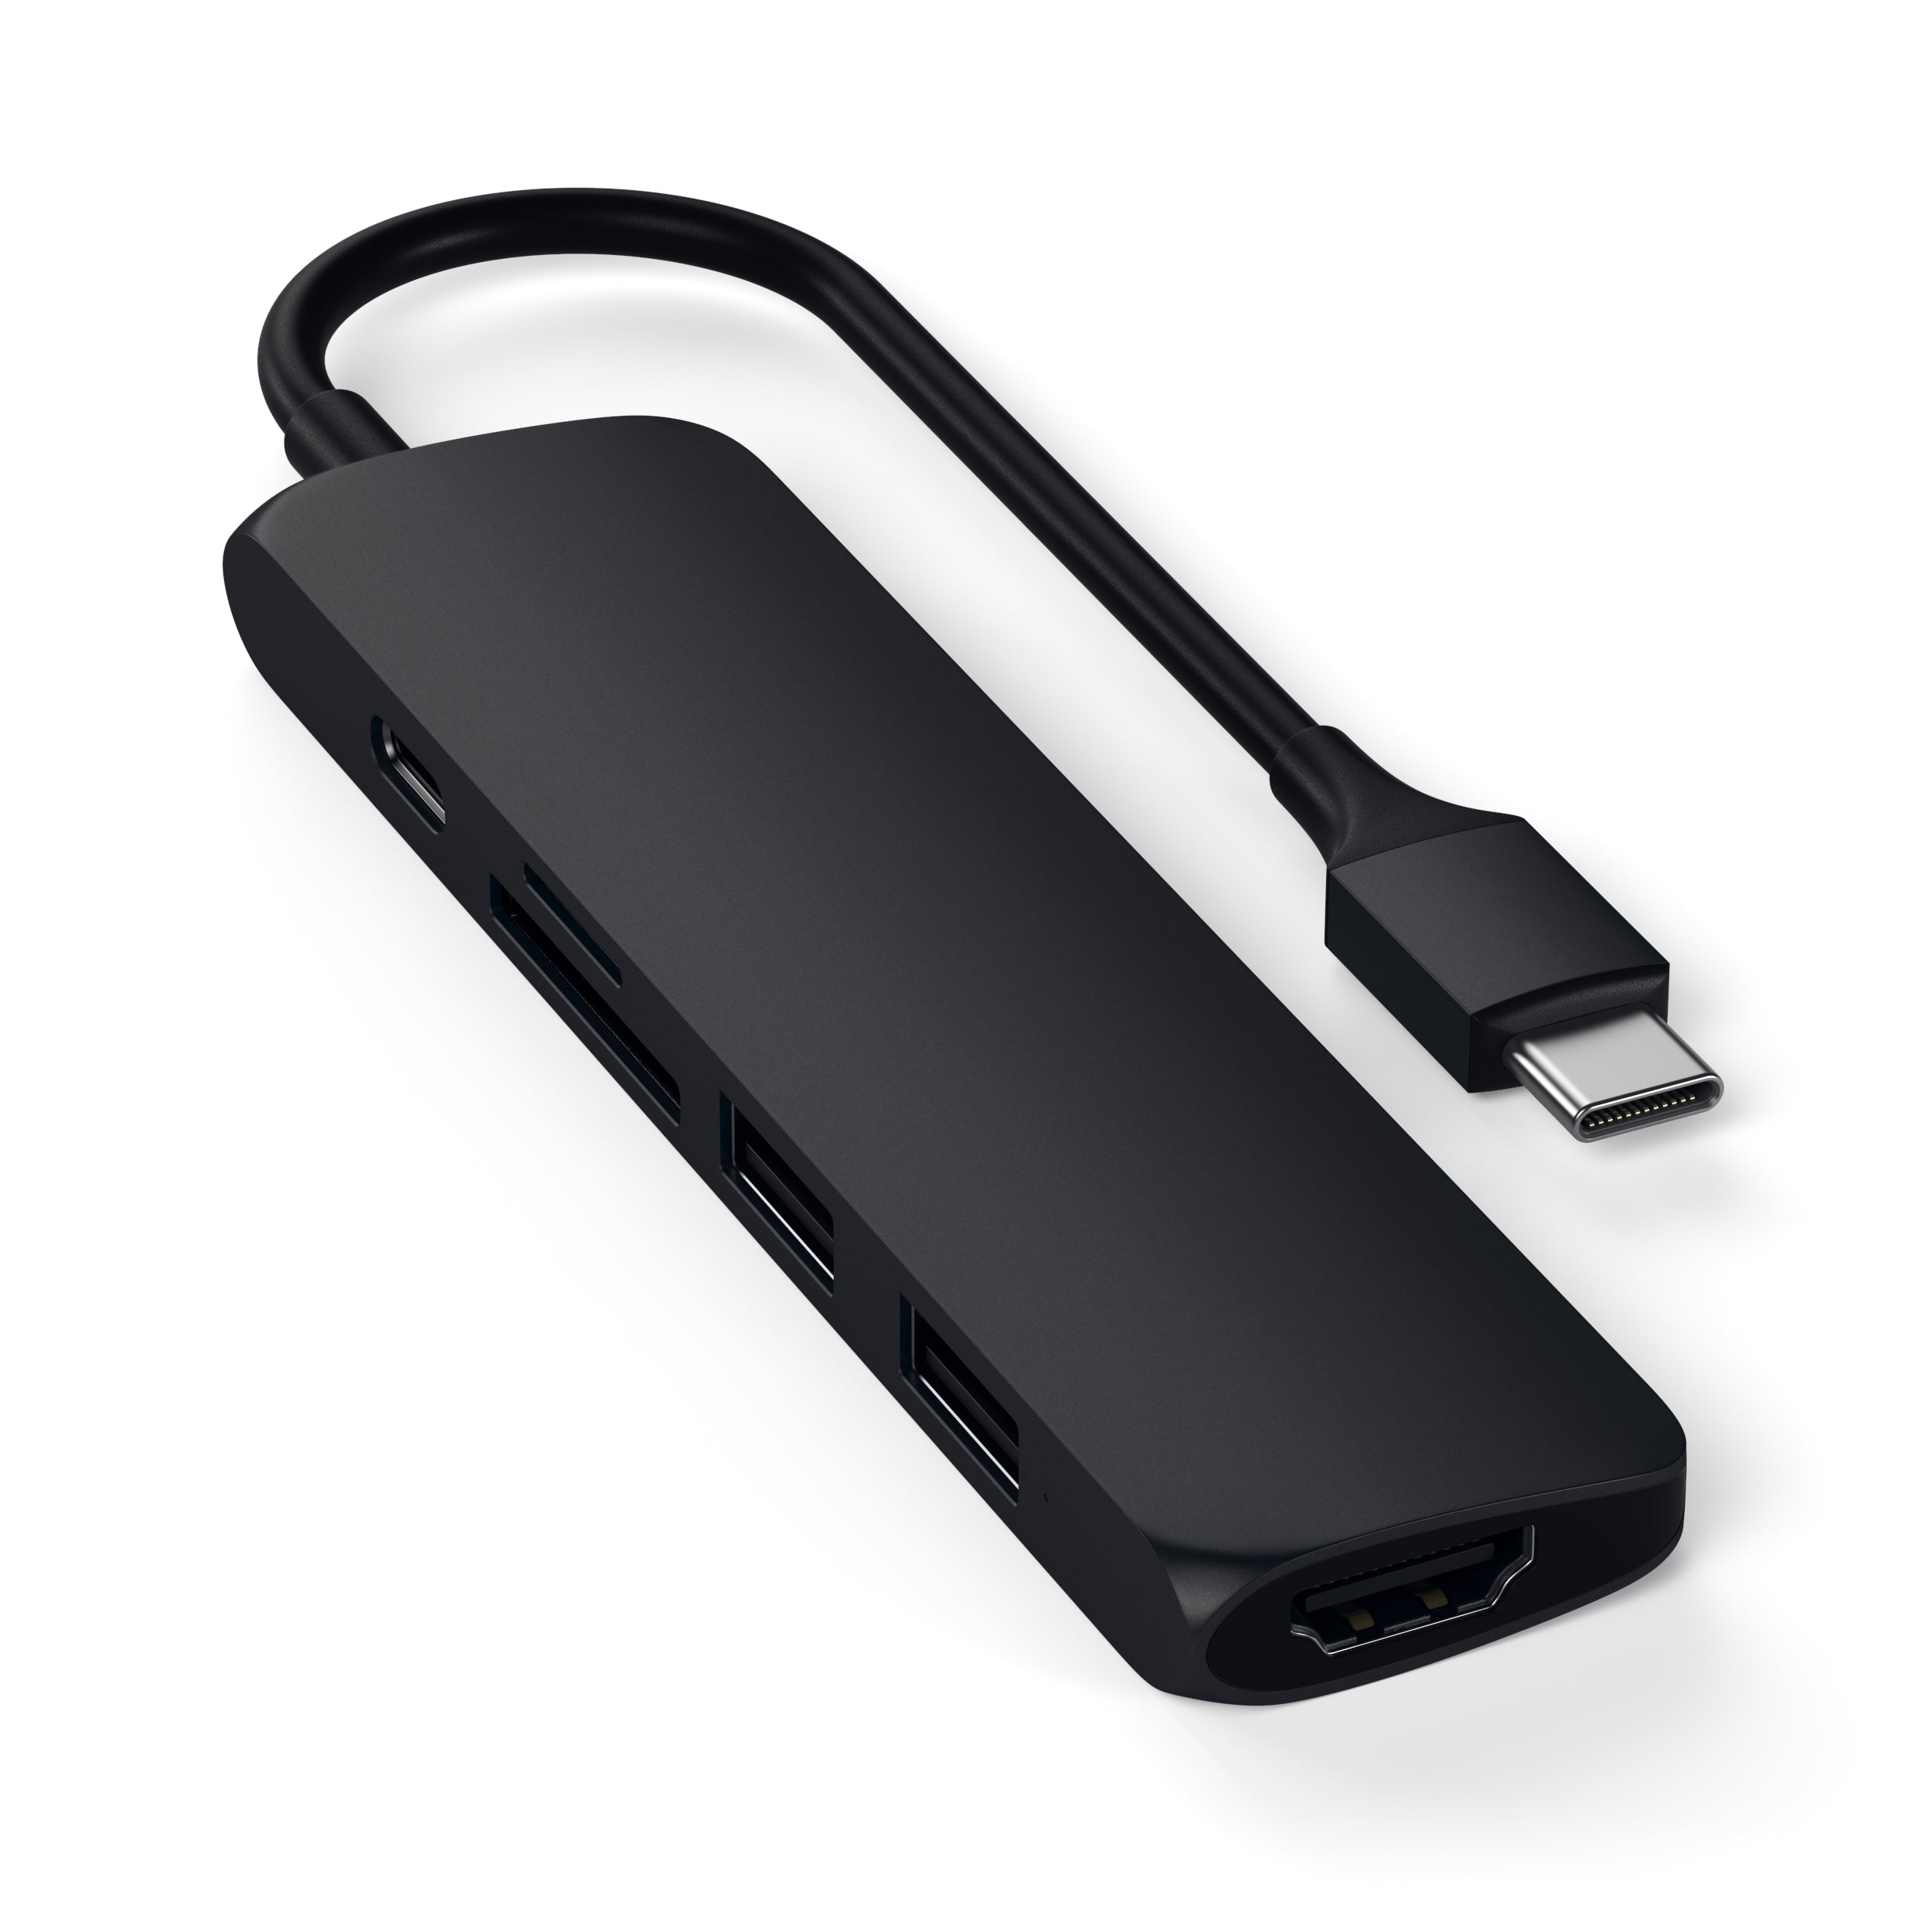 Satechi Slim USB-C Multiport Adapter (V2) Satechi took one of their customer favourite USB-C adapters and made it even better! Their latest Satechi Aluminium Multi-Port Adapter V2, has all the same peripherals that you loved on the previous multiport adap